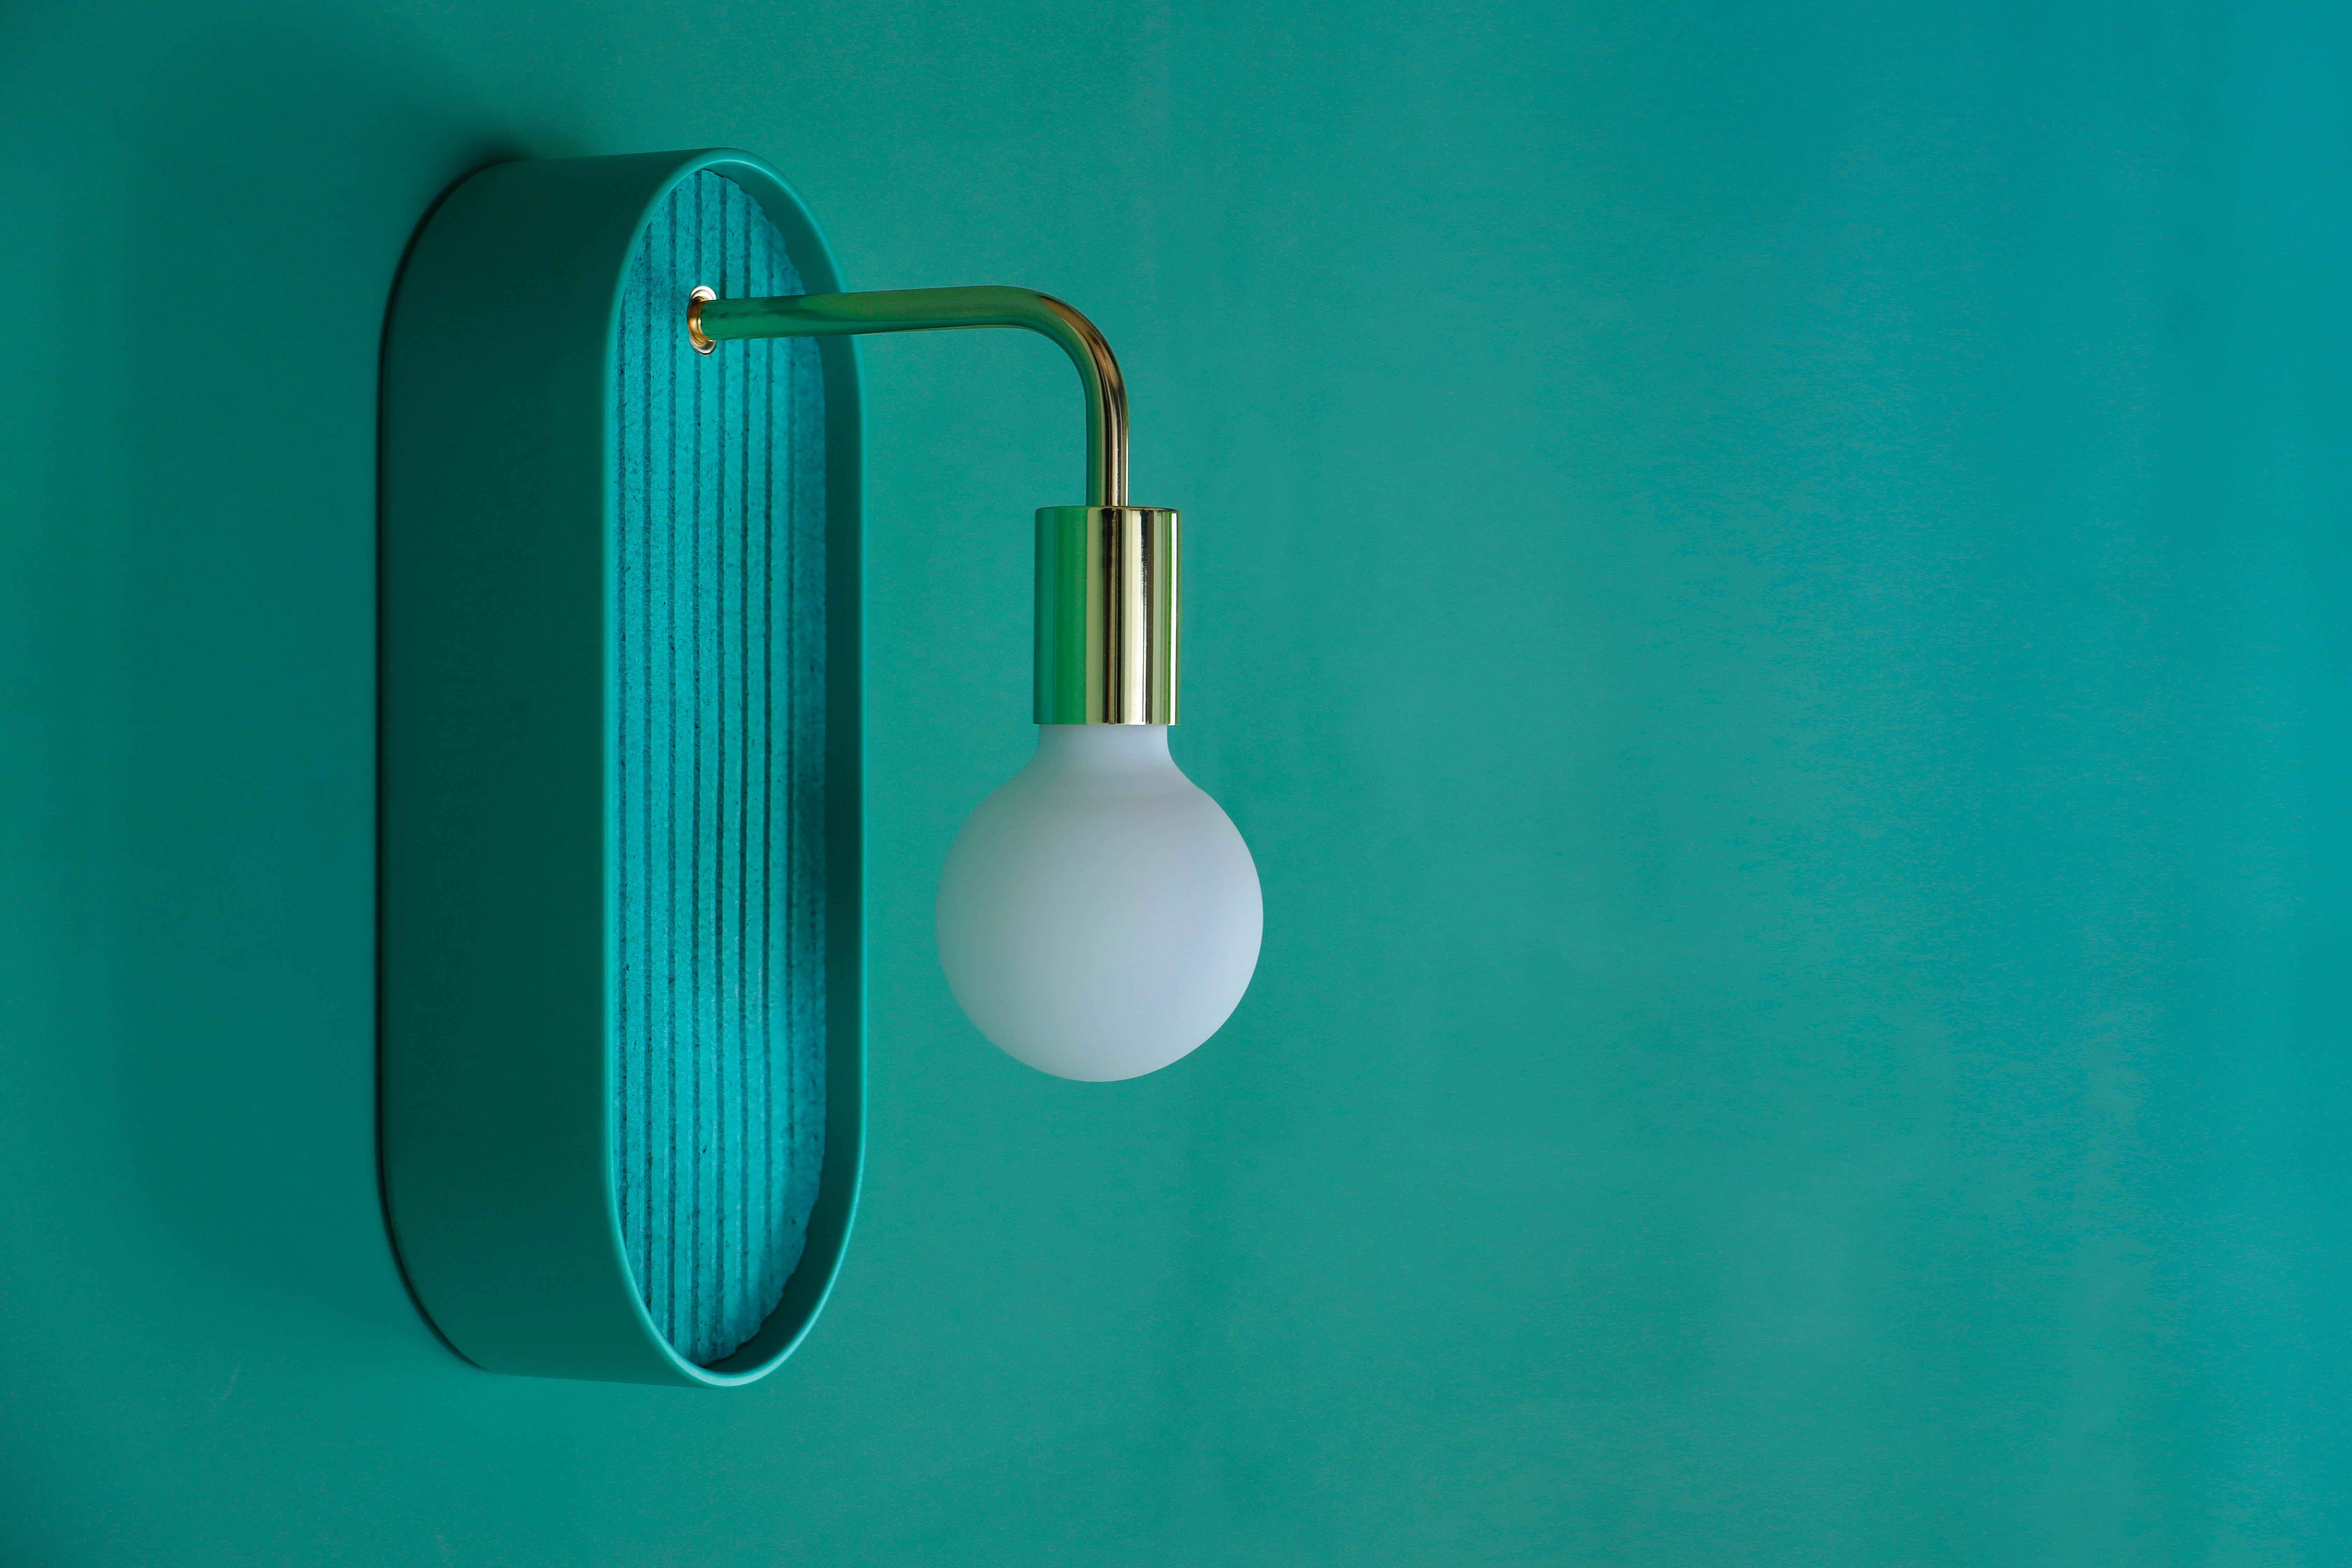 Hand-Crafted Bracketlamp MiniOblong green - green lacquered solid basswood and paper in Stock For Sale